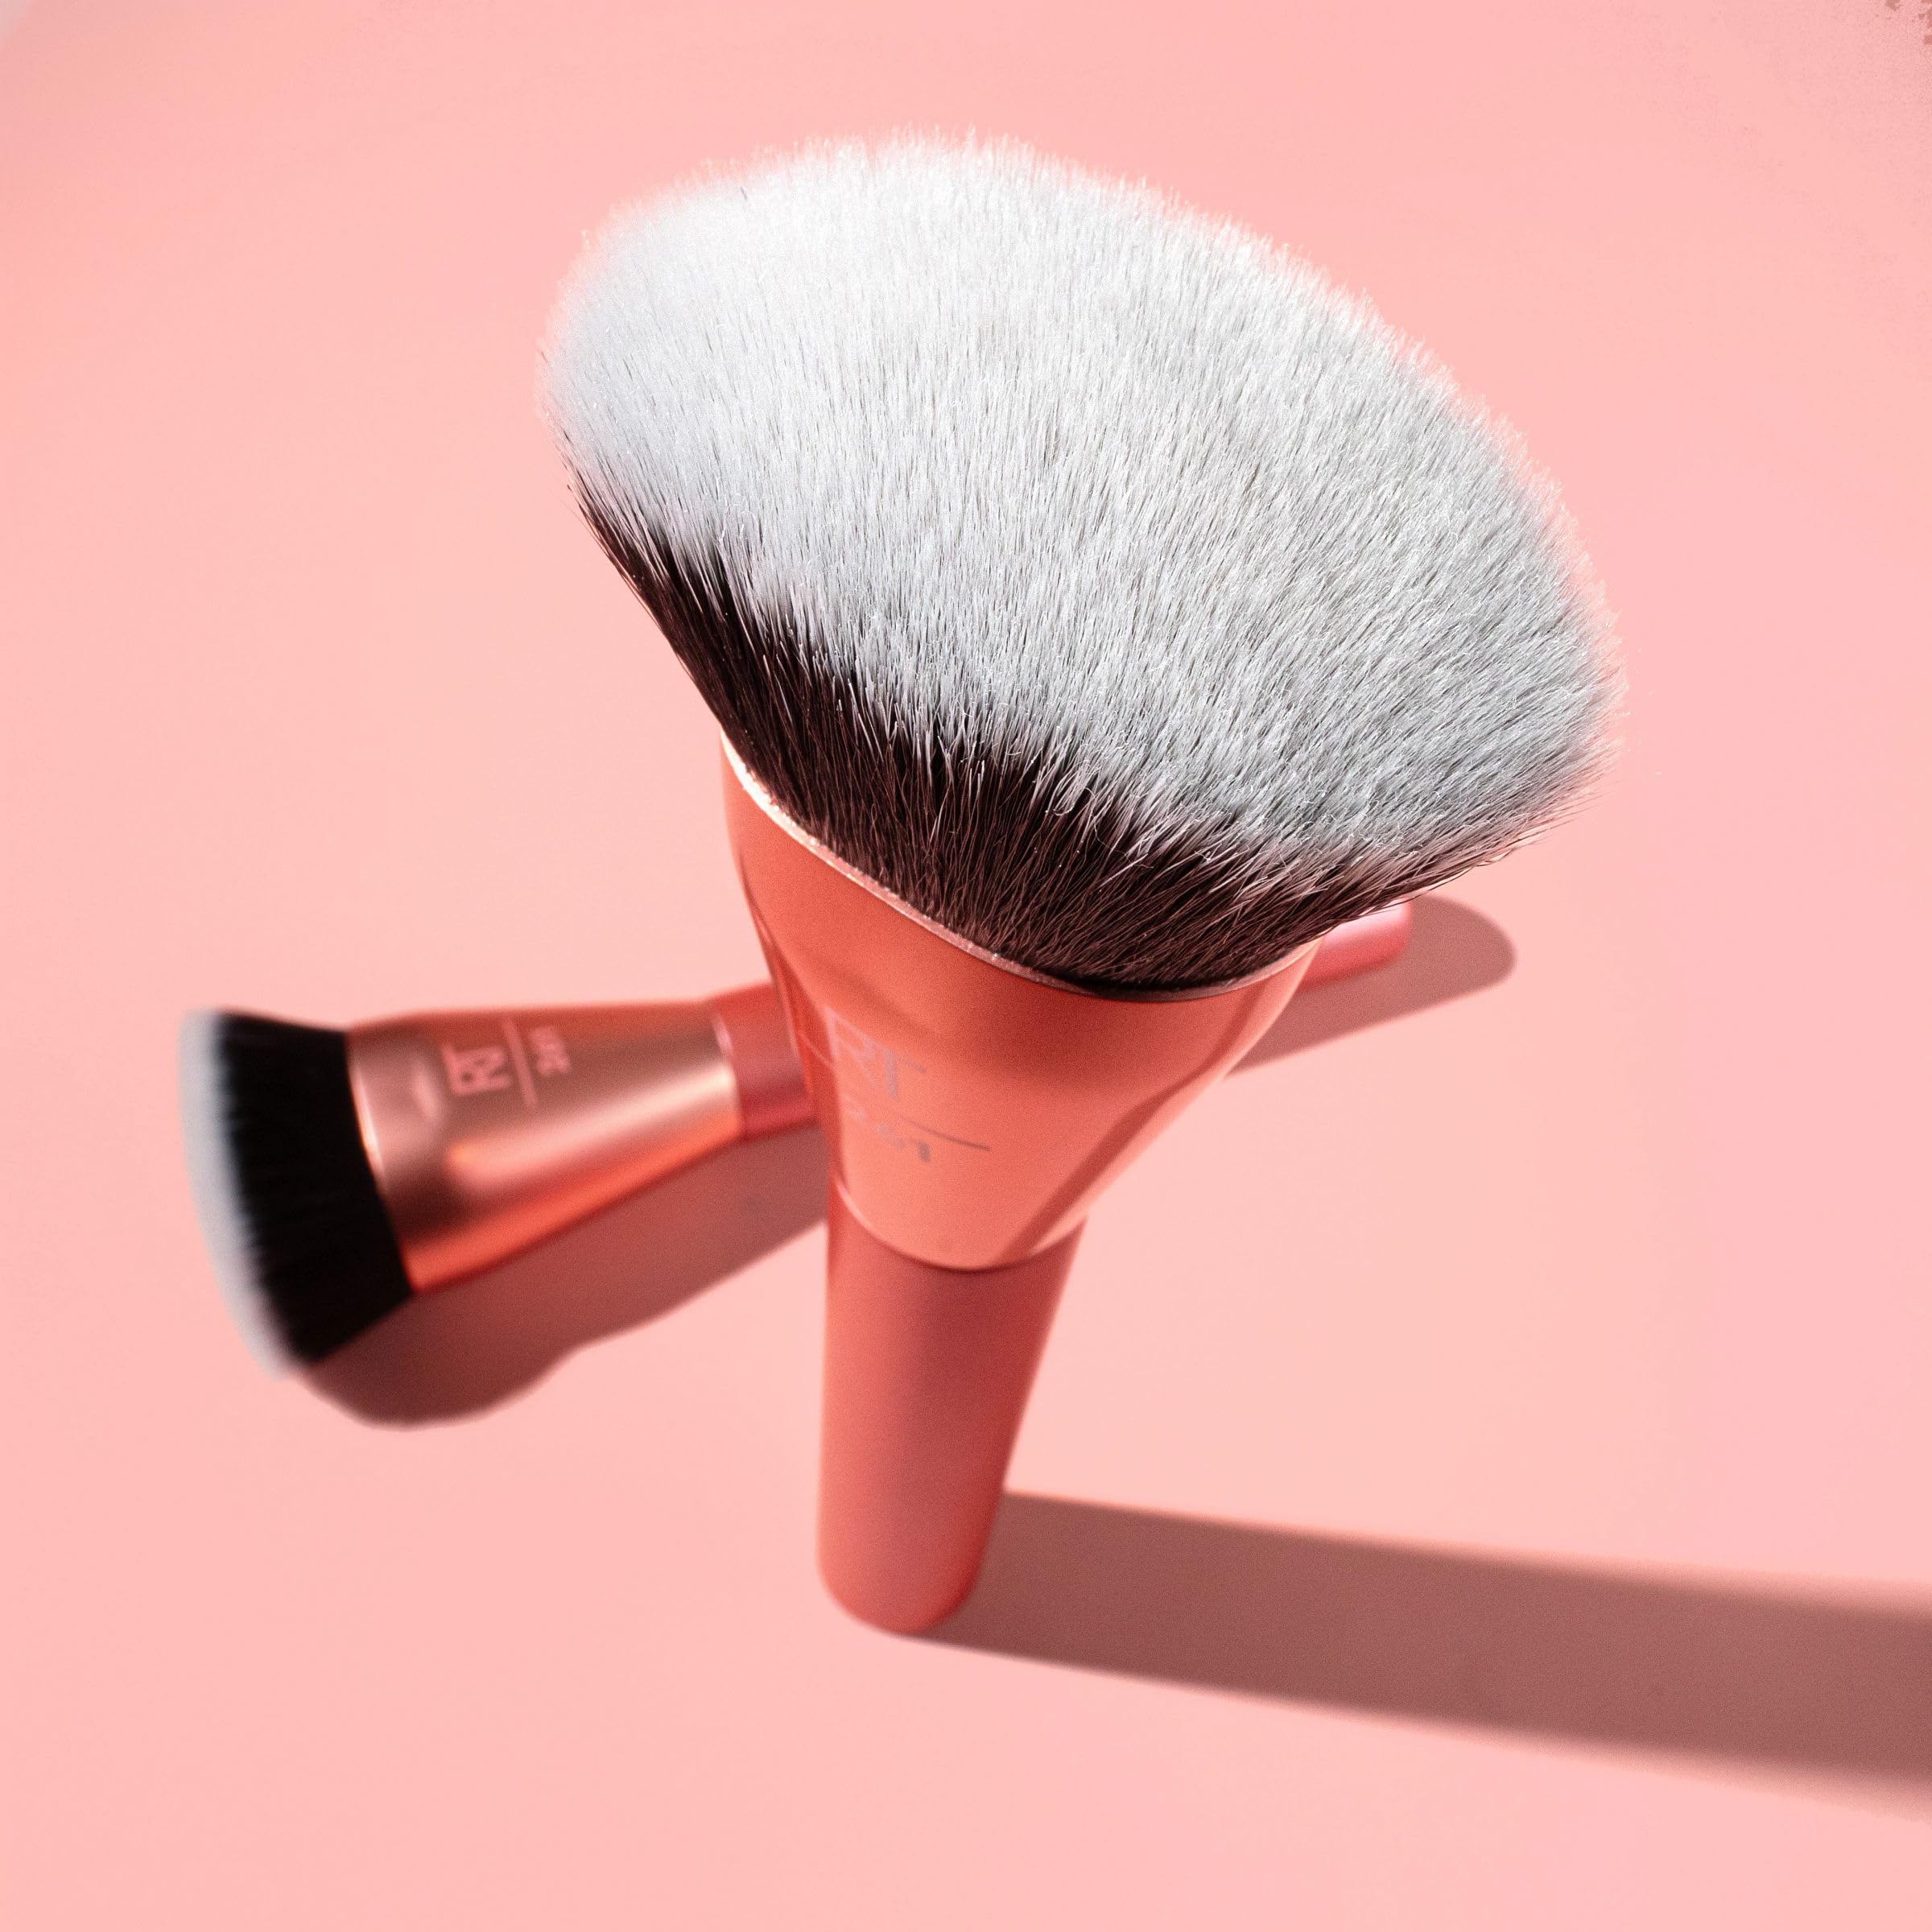 Real Techniques Snatch + Sculpt Contour Makeup Brush, For Liquid & Cream Contour & Bronzer, Flat Top & Oval Head For Blending & Buffing, Dense, Synthetic Bristles, Vegan & Cruelty Free, 1 Count